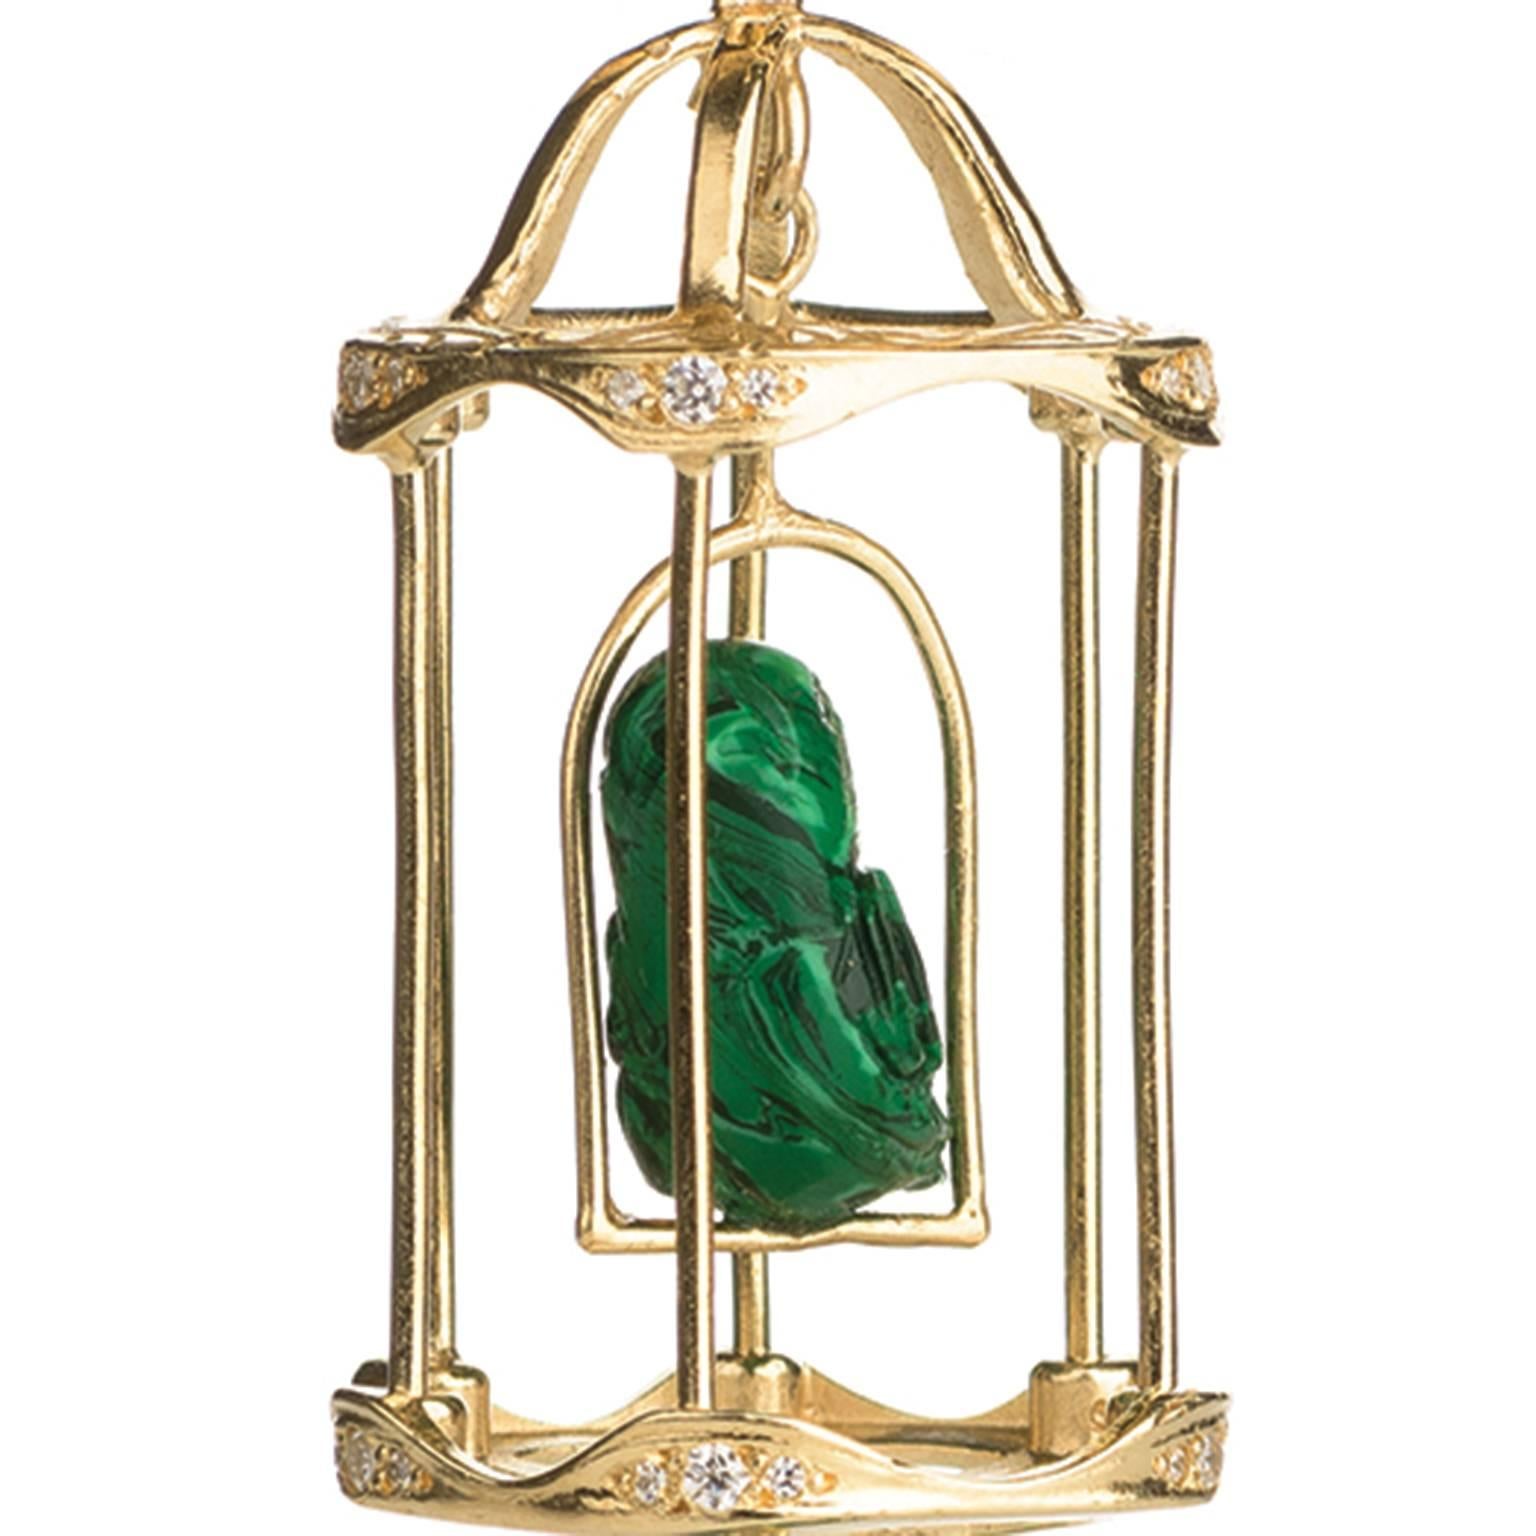 These earrings feature an open cage of 18 karat yellow gold sheltering delicate lovebirds sculpted from deep green malachite. Singing happily into your ear, the birds’ eyes twinkle with Top Wesselton diamonds totaling 0,04 carats while the golden